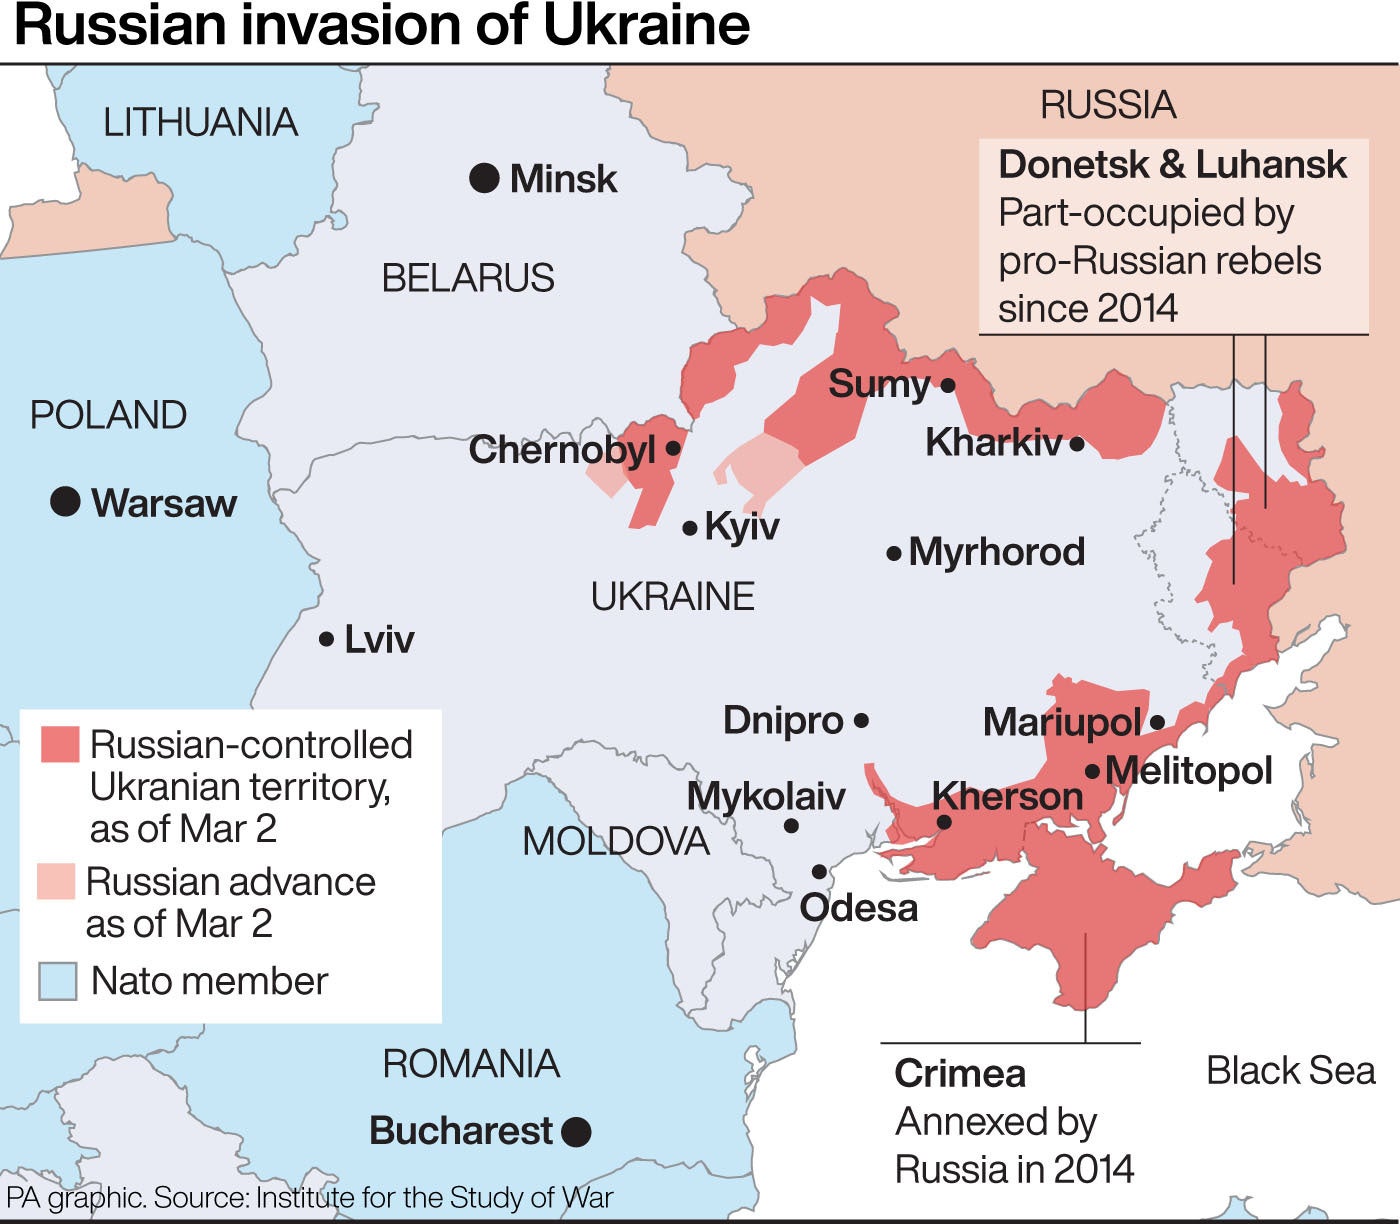 This map shows the areas held by Russian forces in Ukraine